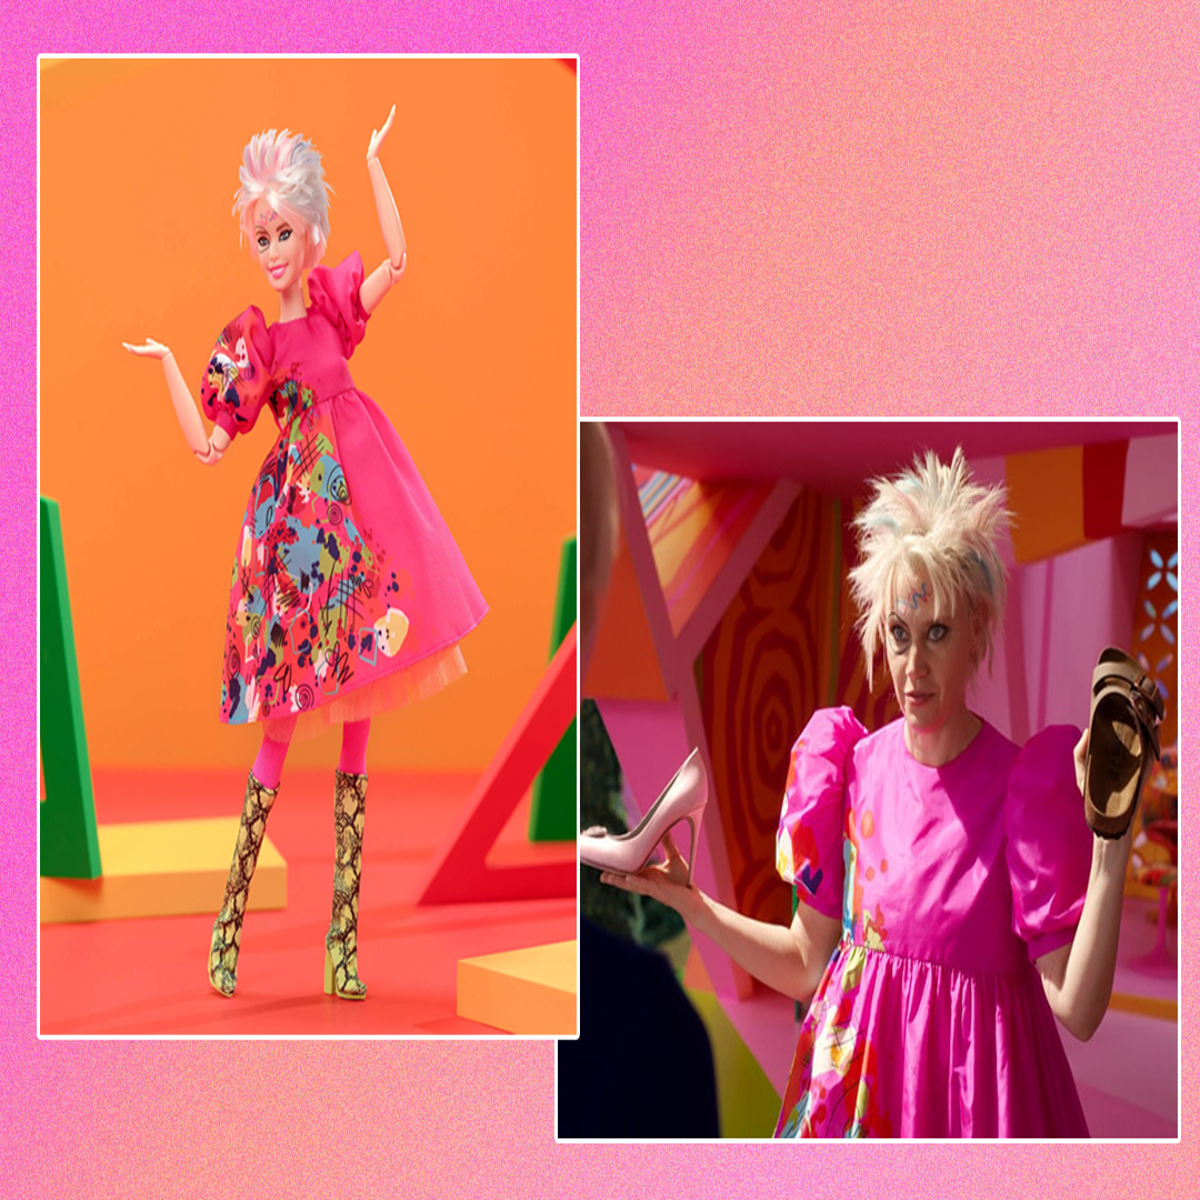 Mattel launches Weird Barbie doll based on Barbie The Movie